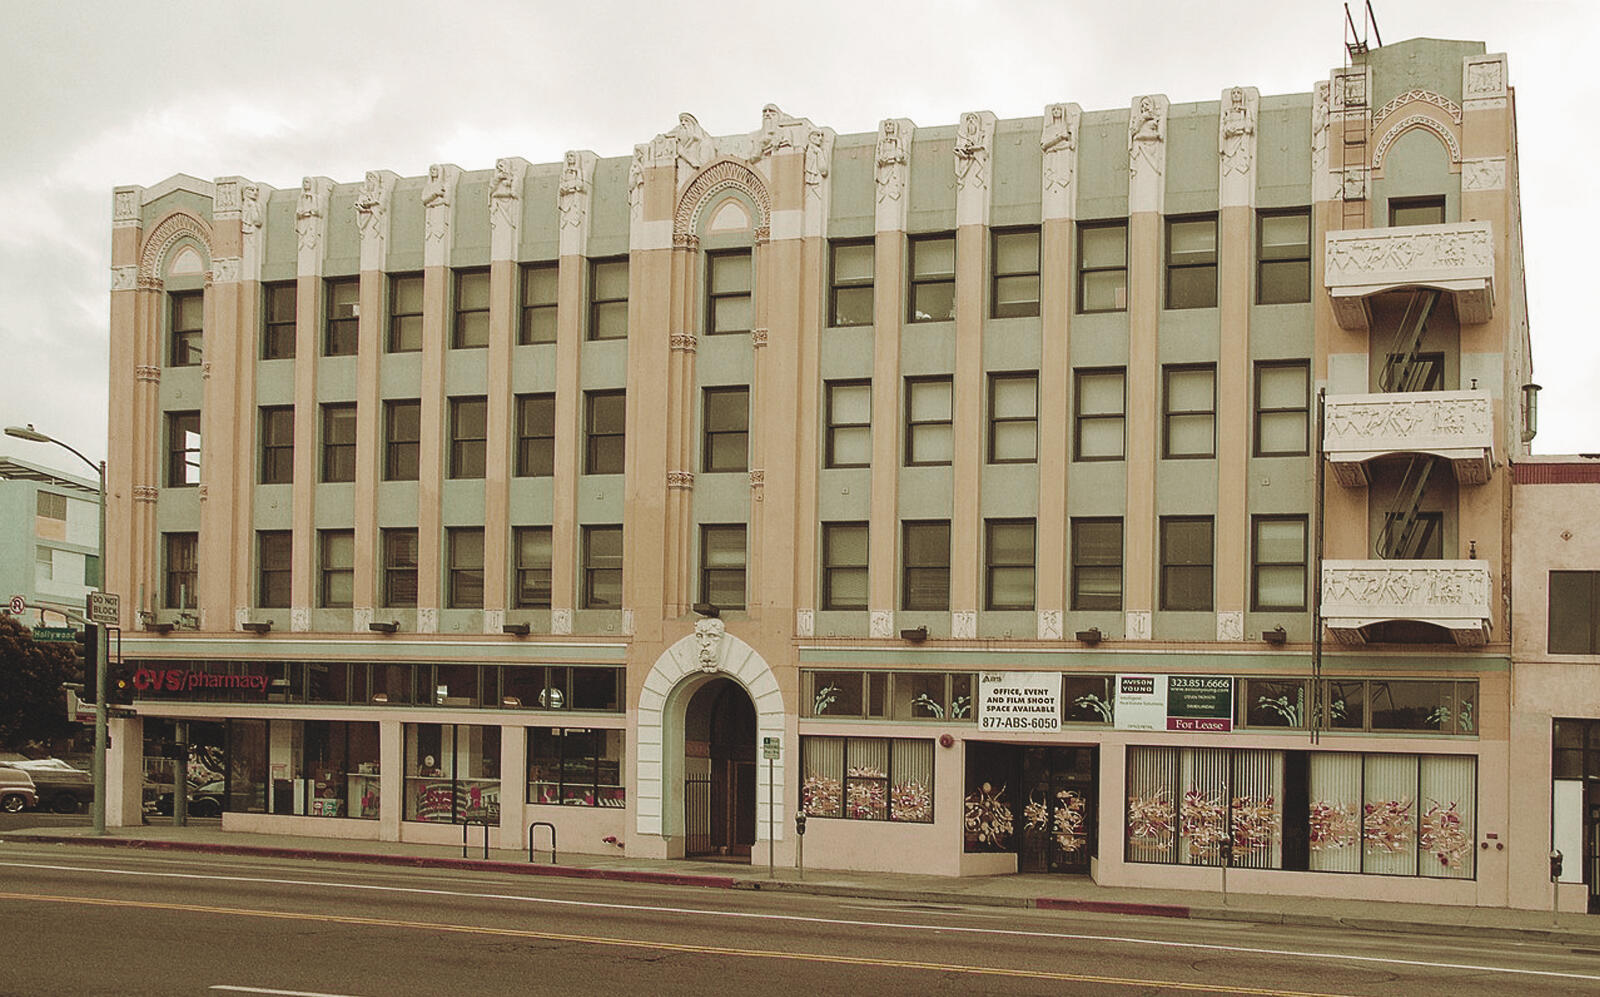 The Hollywood & Western Building (WikiMedia via Downtowngal)